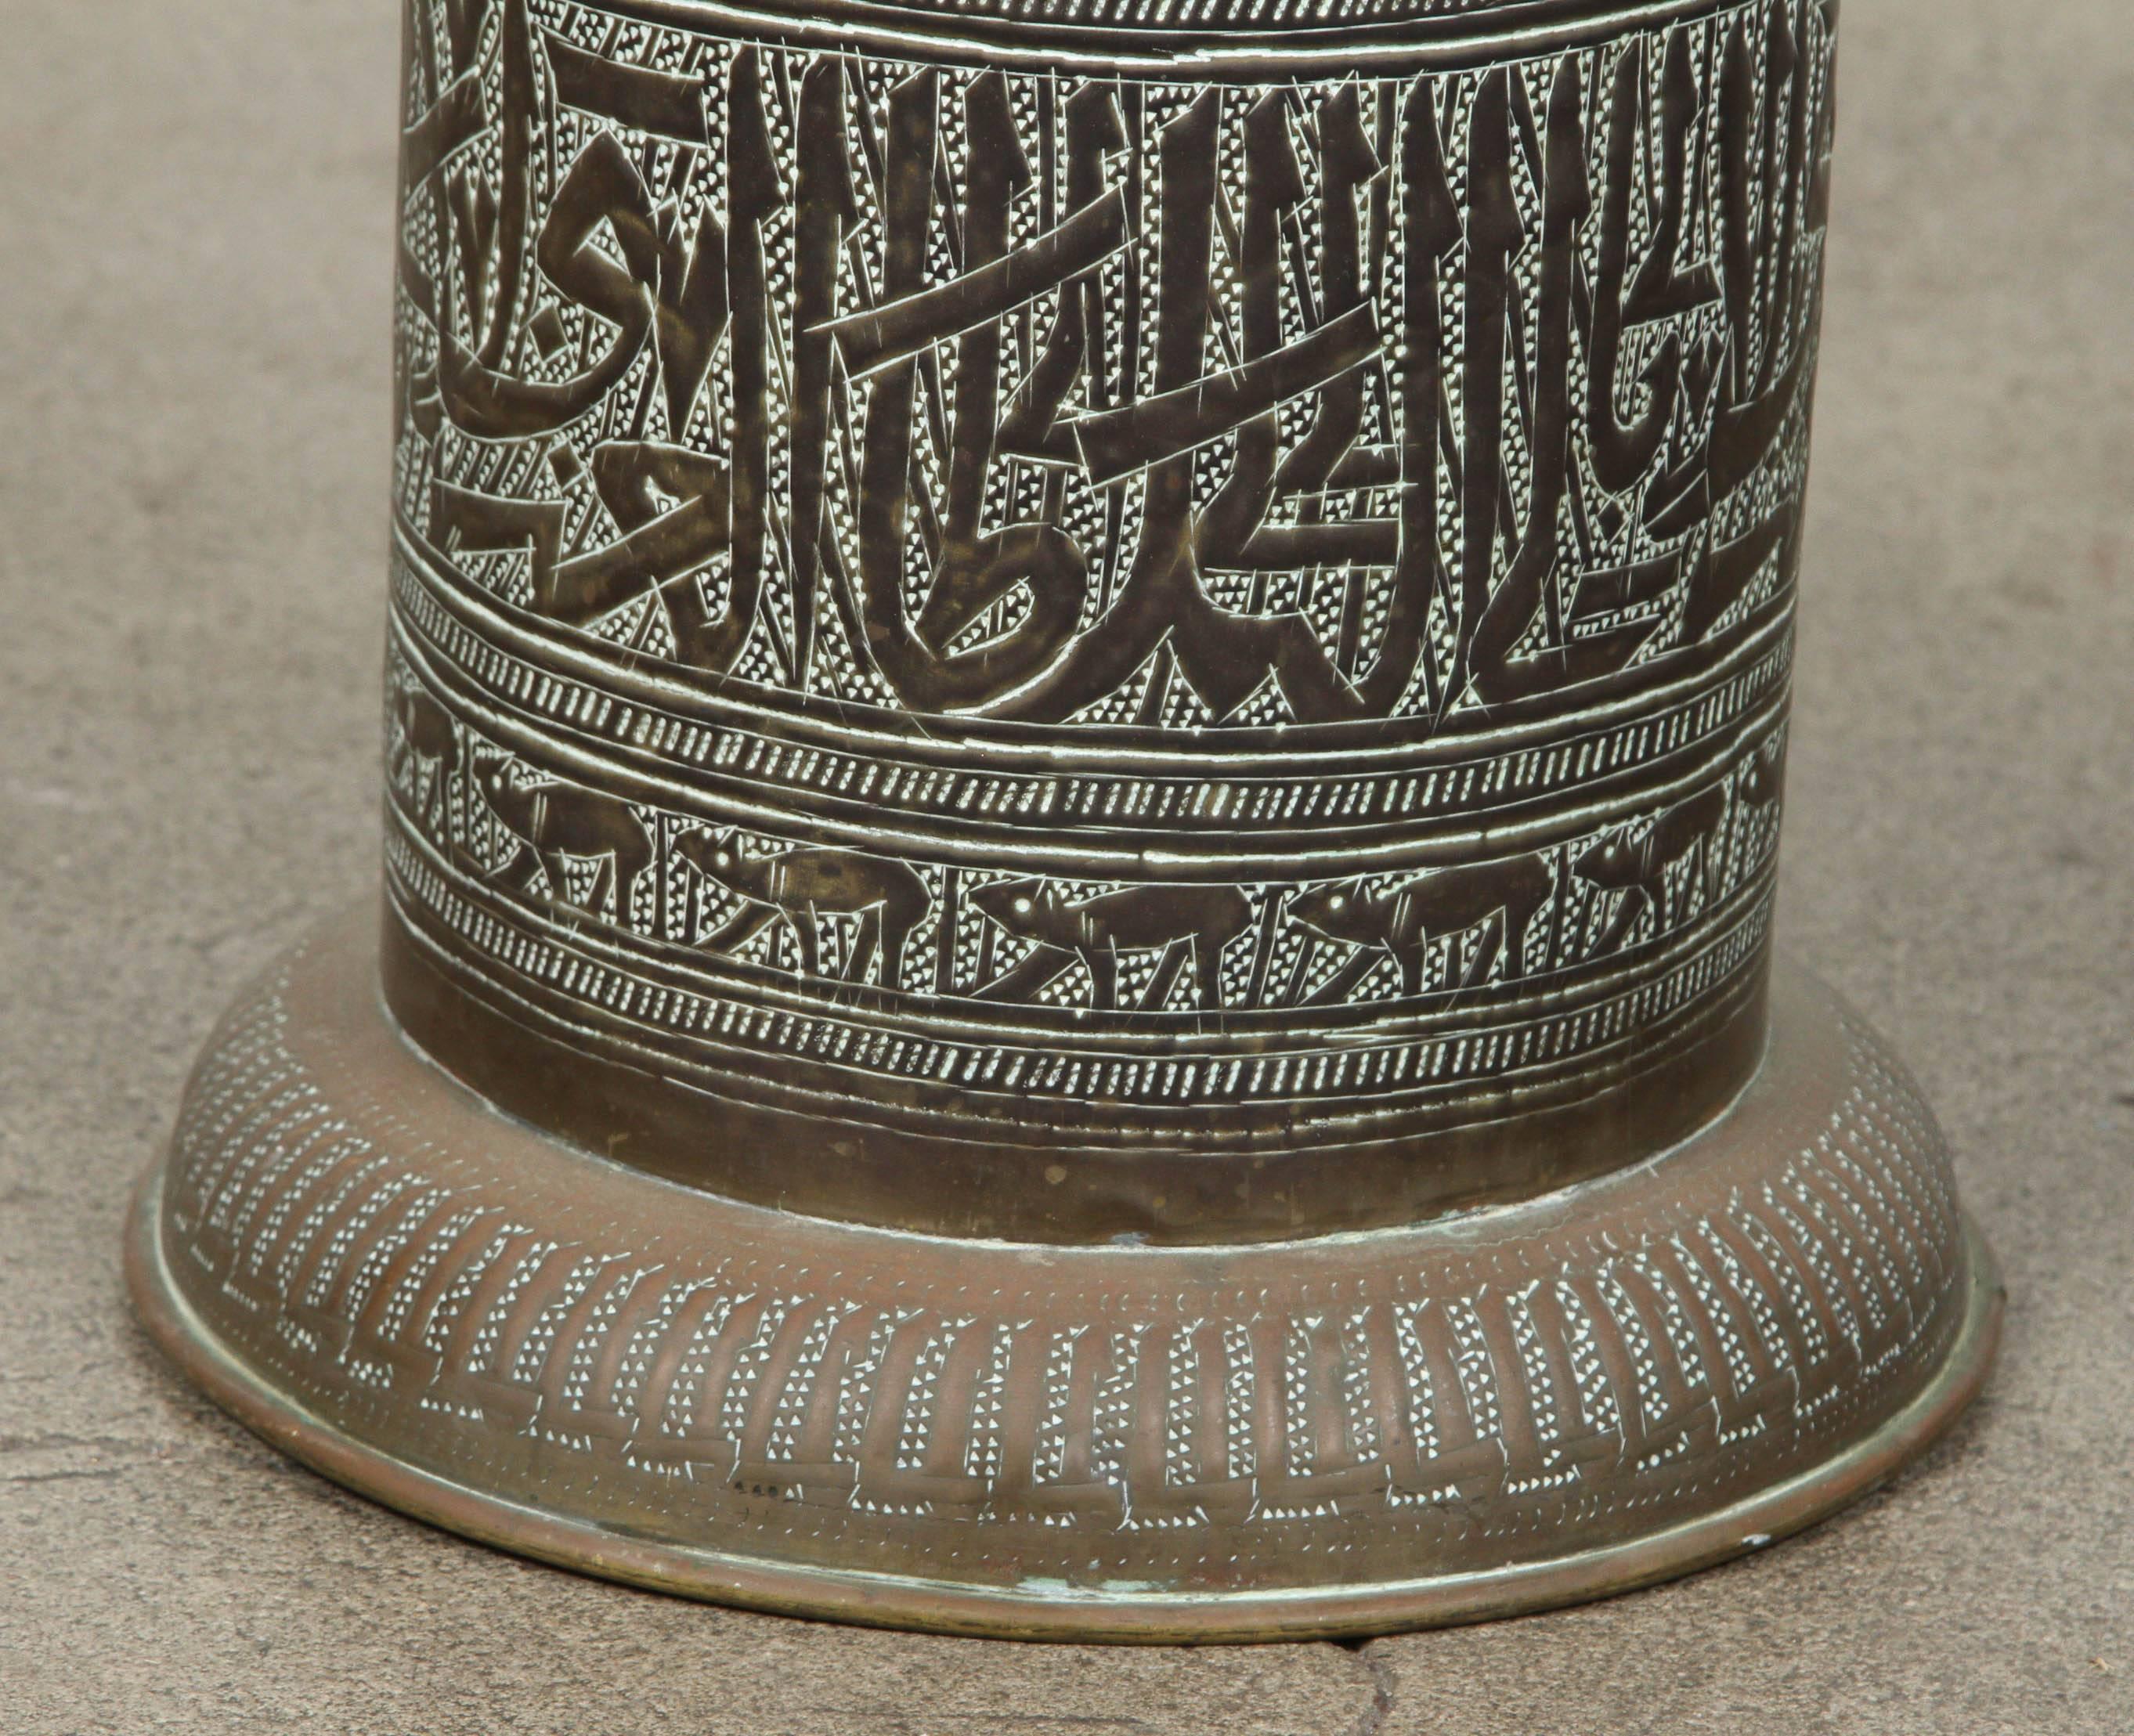 Indian Brass Umbrella Stand with Islamic Calligraphy Writing